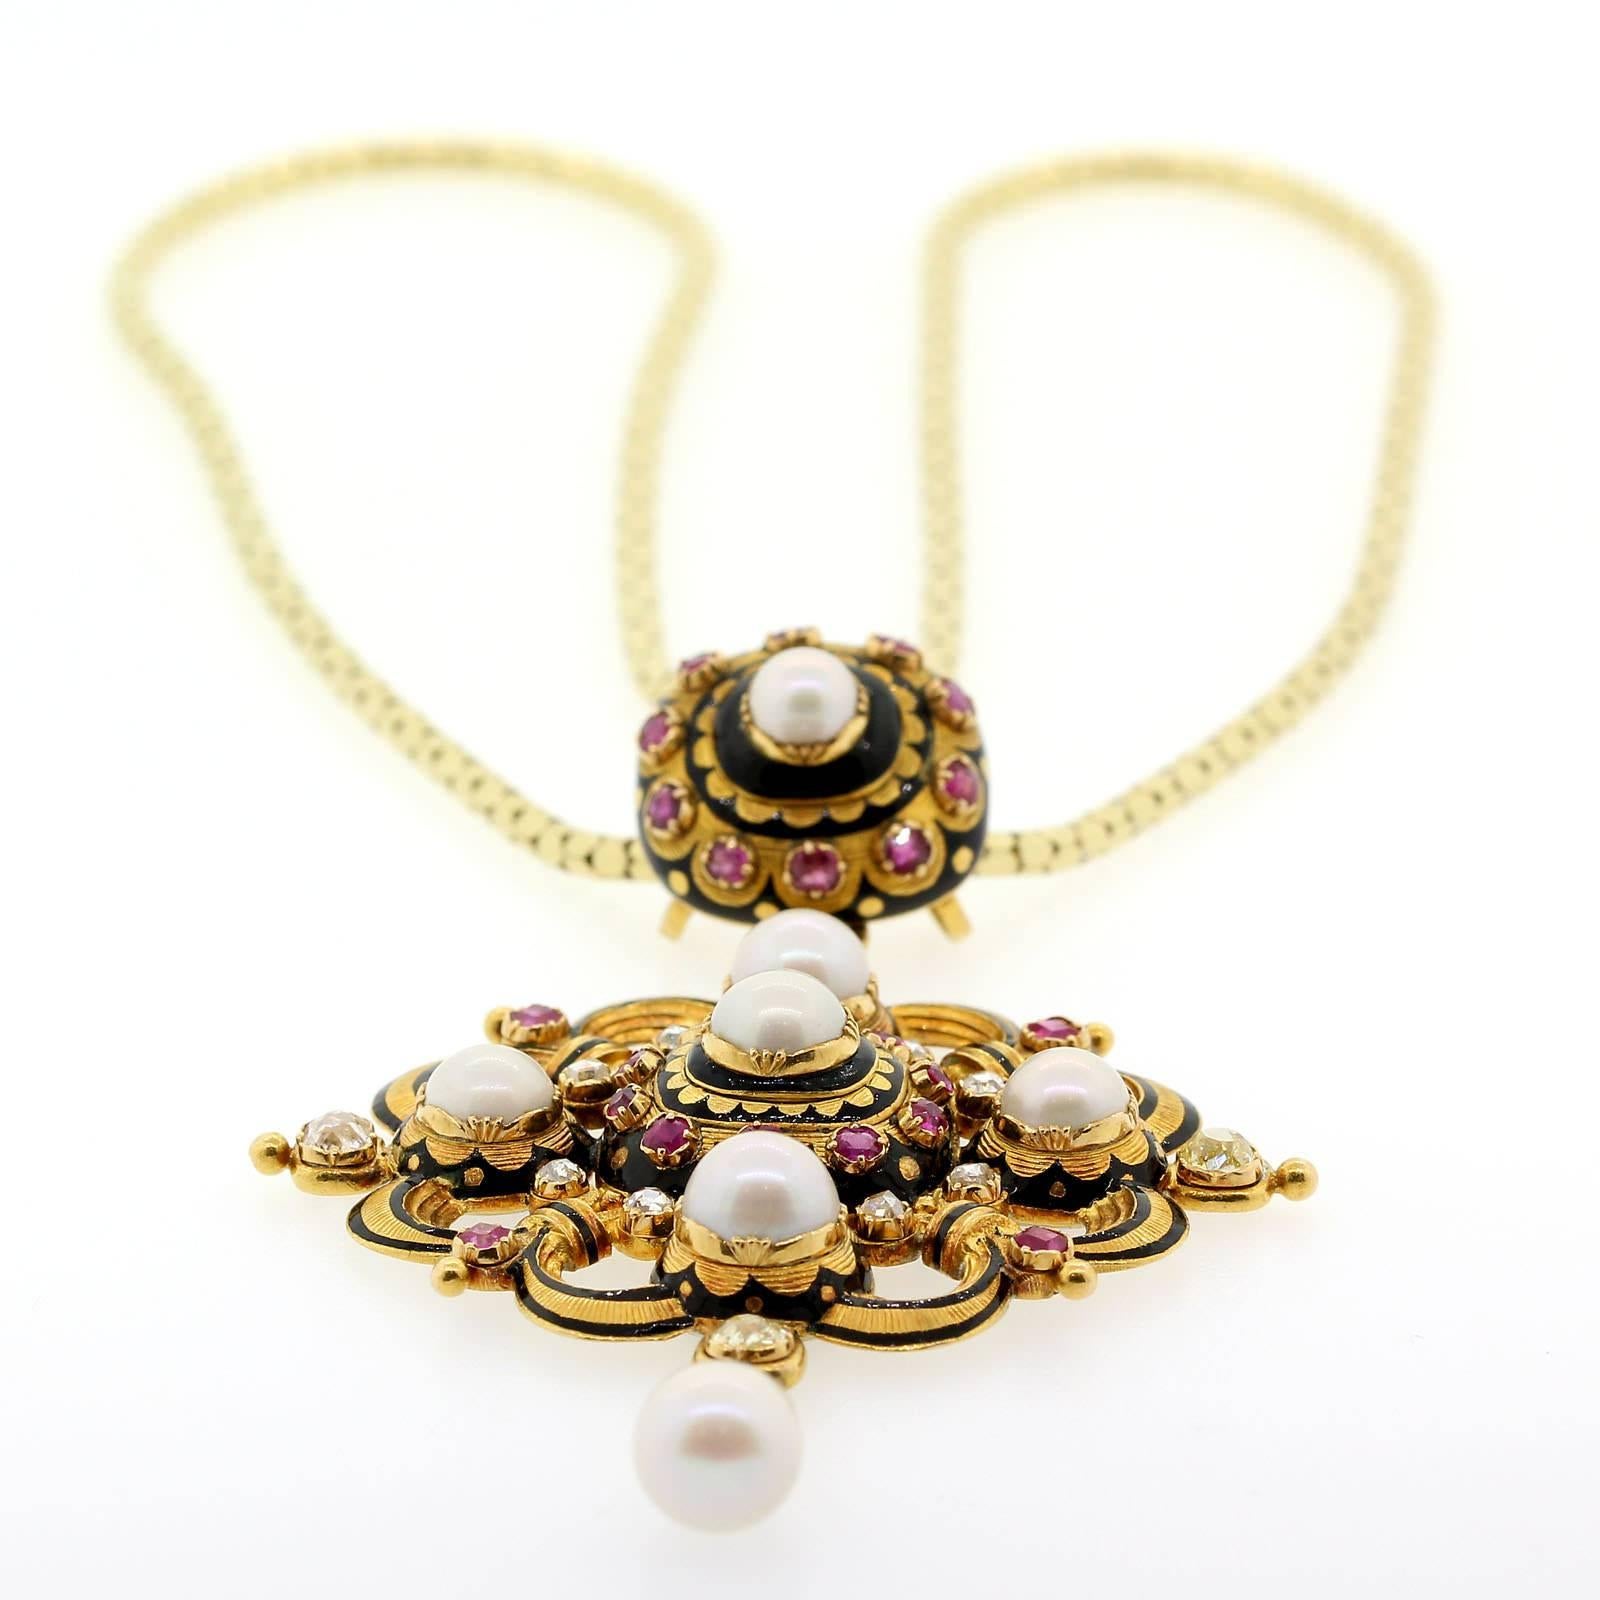 An exquisite antique European 18Kt yellow gold pendant set with seven untreated, natural white pearls, twelve Old Cut Diamonds and Pink Sapphires.  The pendant opens to a class cover compartment.   Circa 1890s.  It is dreamy!